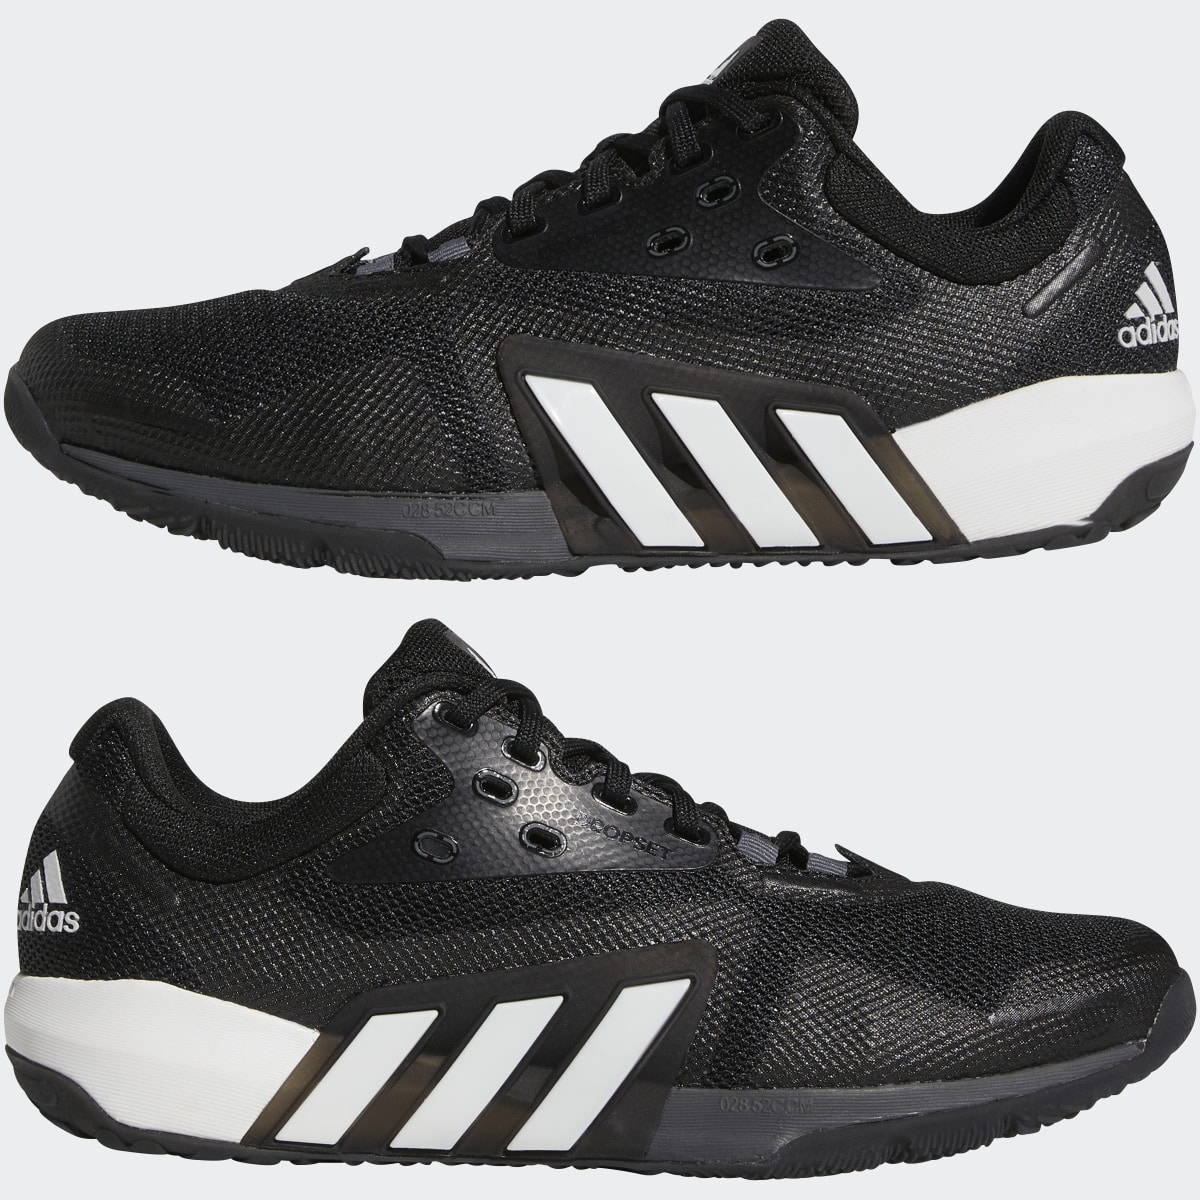 Adidas Dropset Trainers. 9